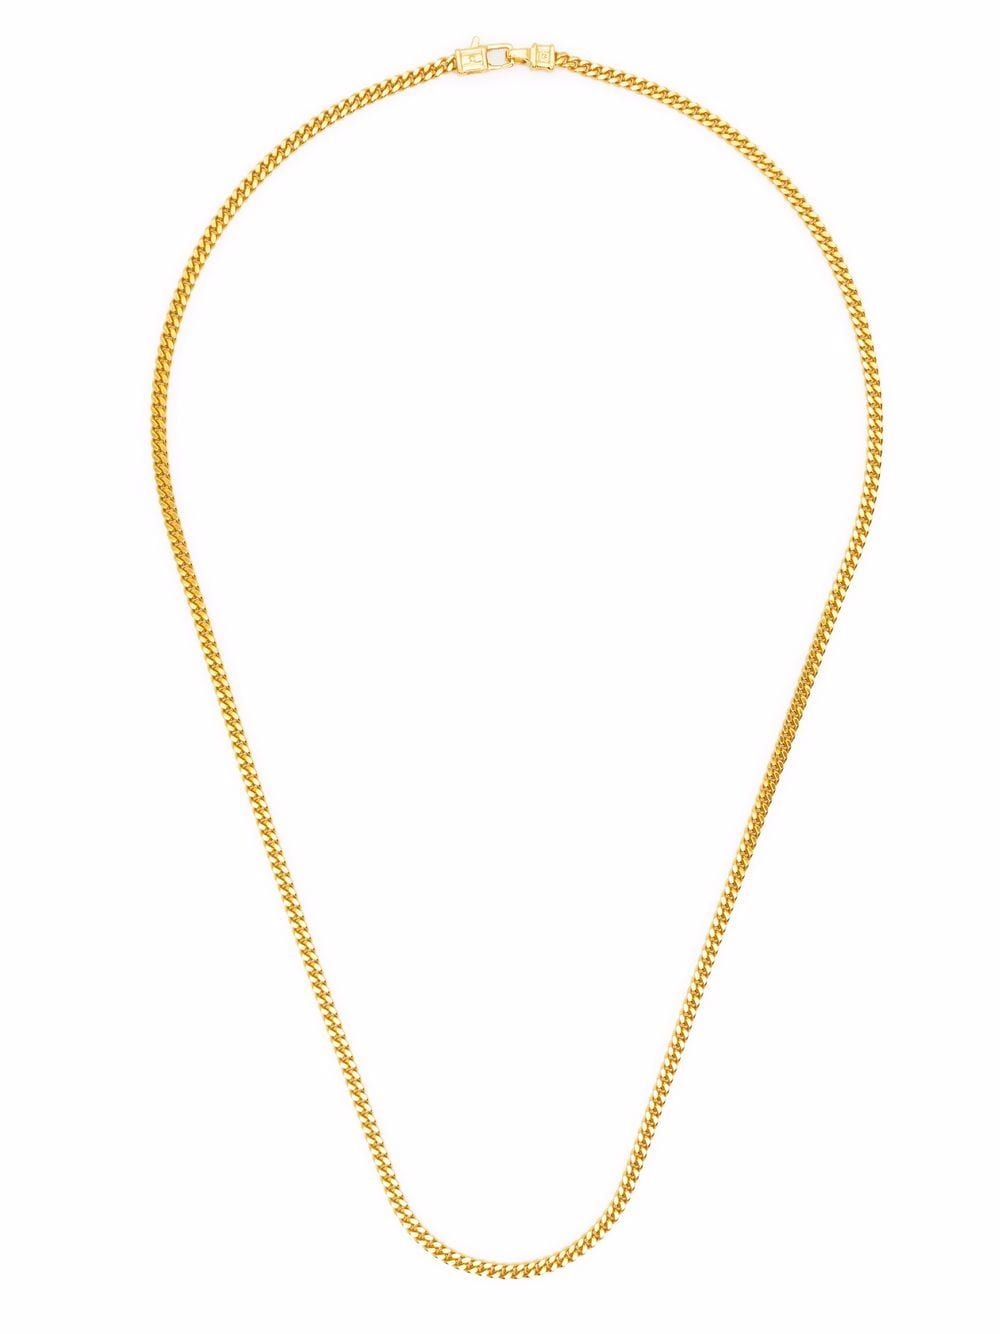 Tom Wood Curb Chain M gold-plated sterling silver necklace von Tom Wood